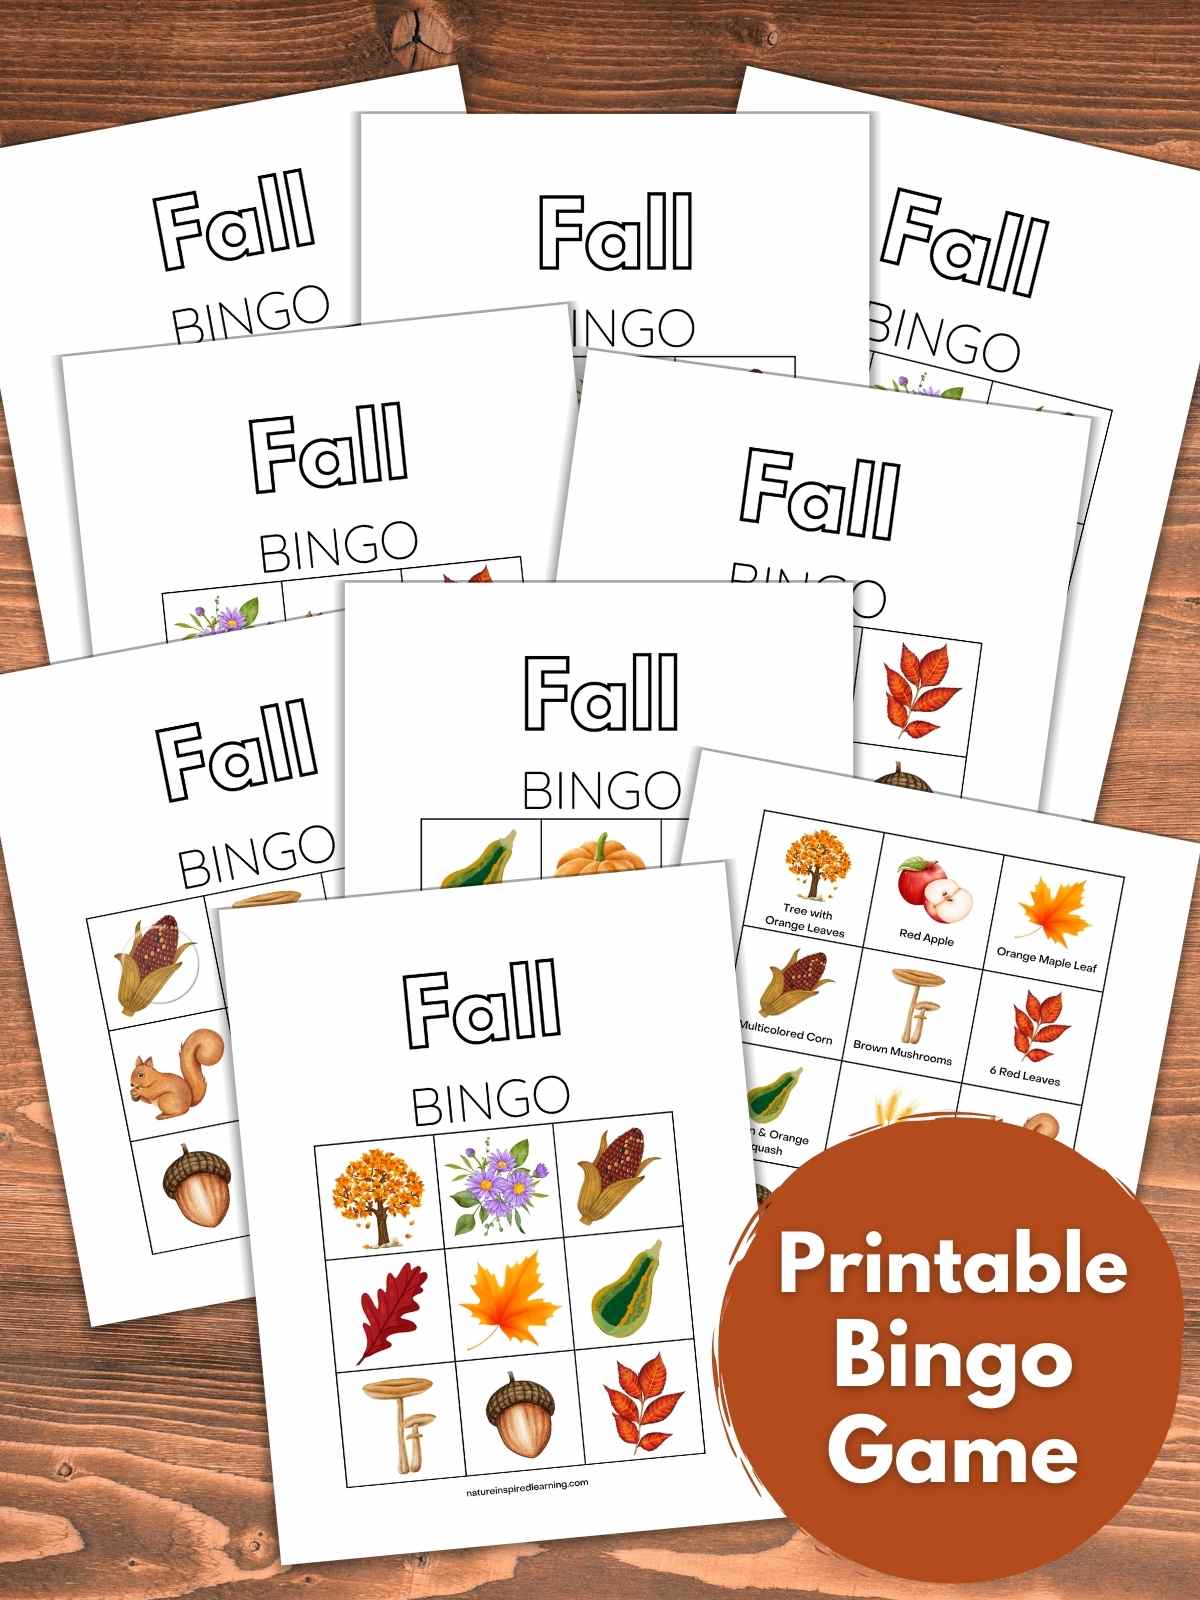 set of printable fall bingo cards and calling cards overlapping on a wooden background with orange circle bottom right with text overaly